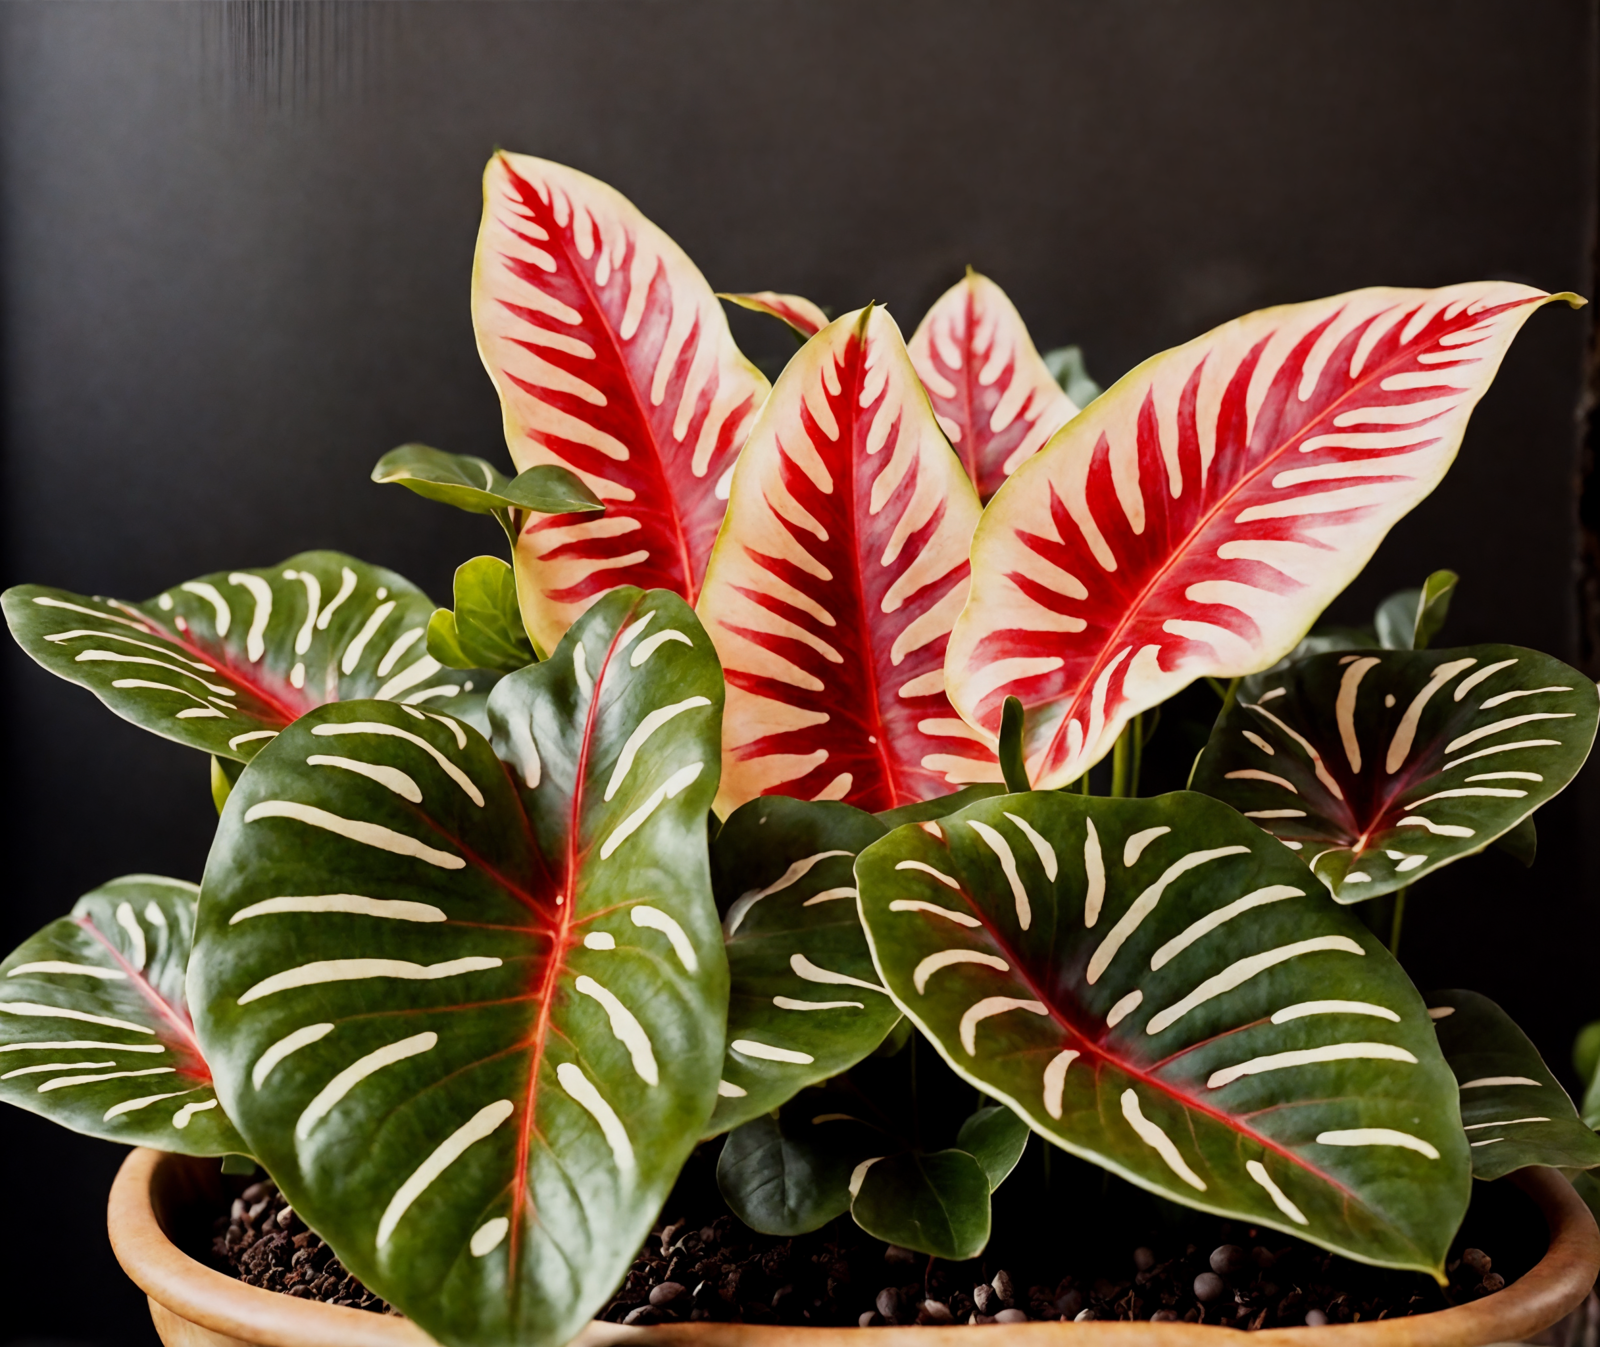 A bowl of vibrant red and pink Caladium bicolor leaves, with clear lighting against a dark background.